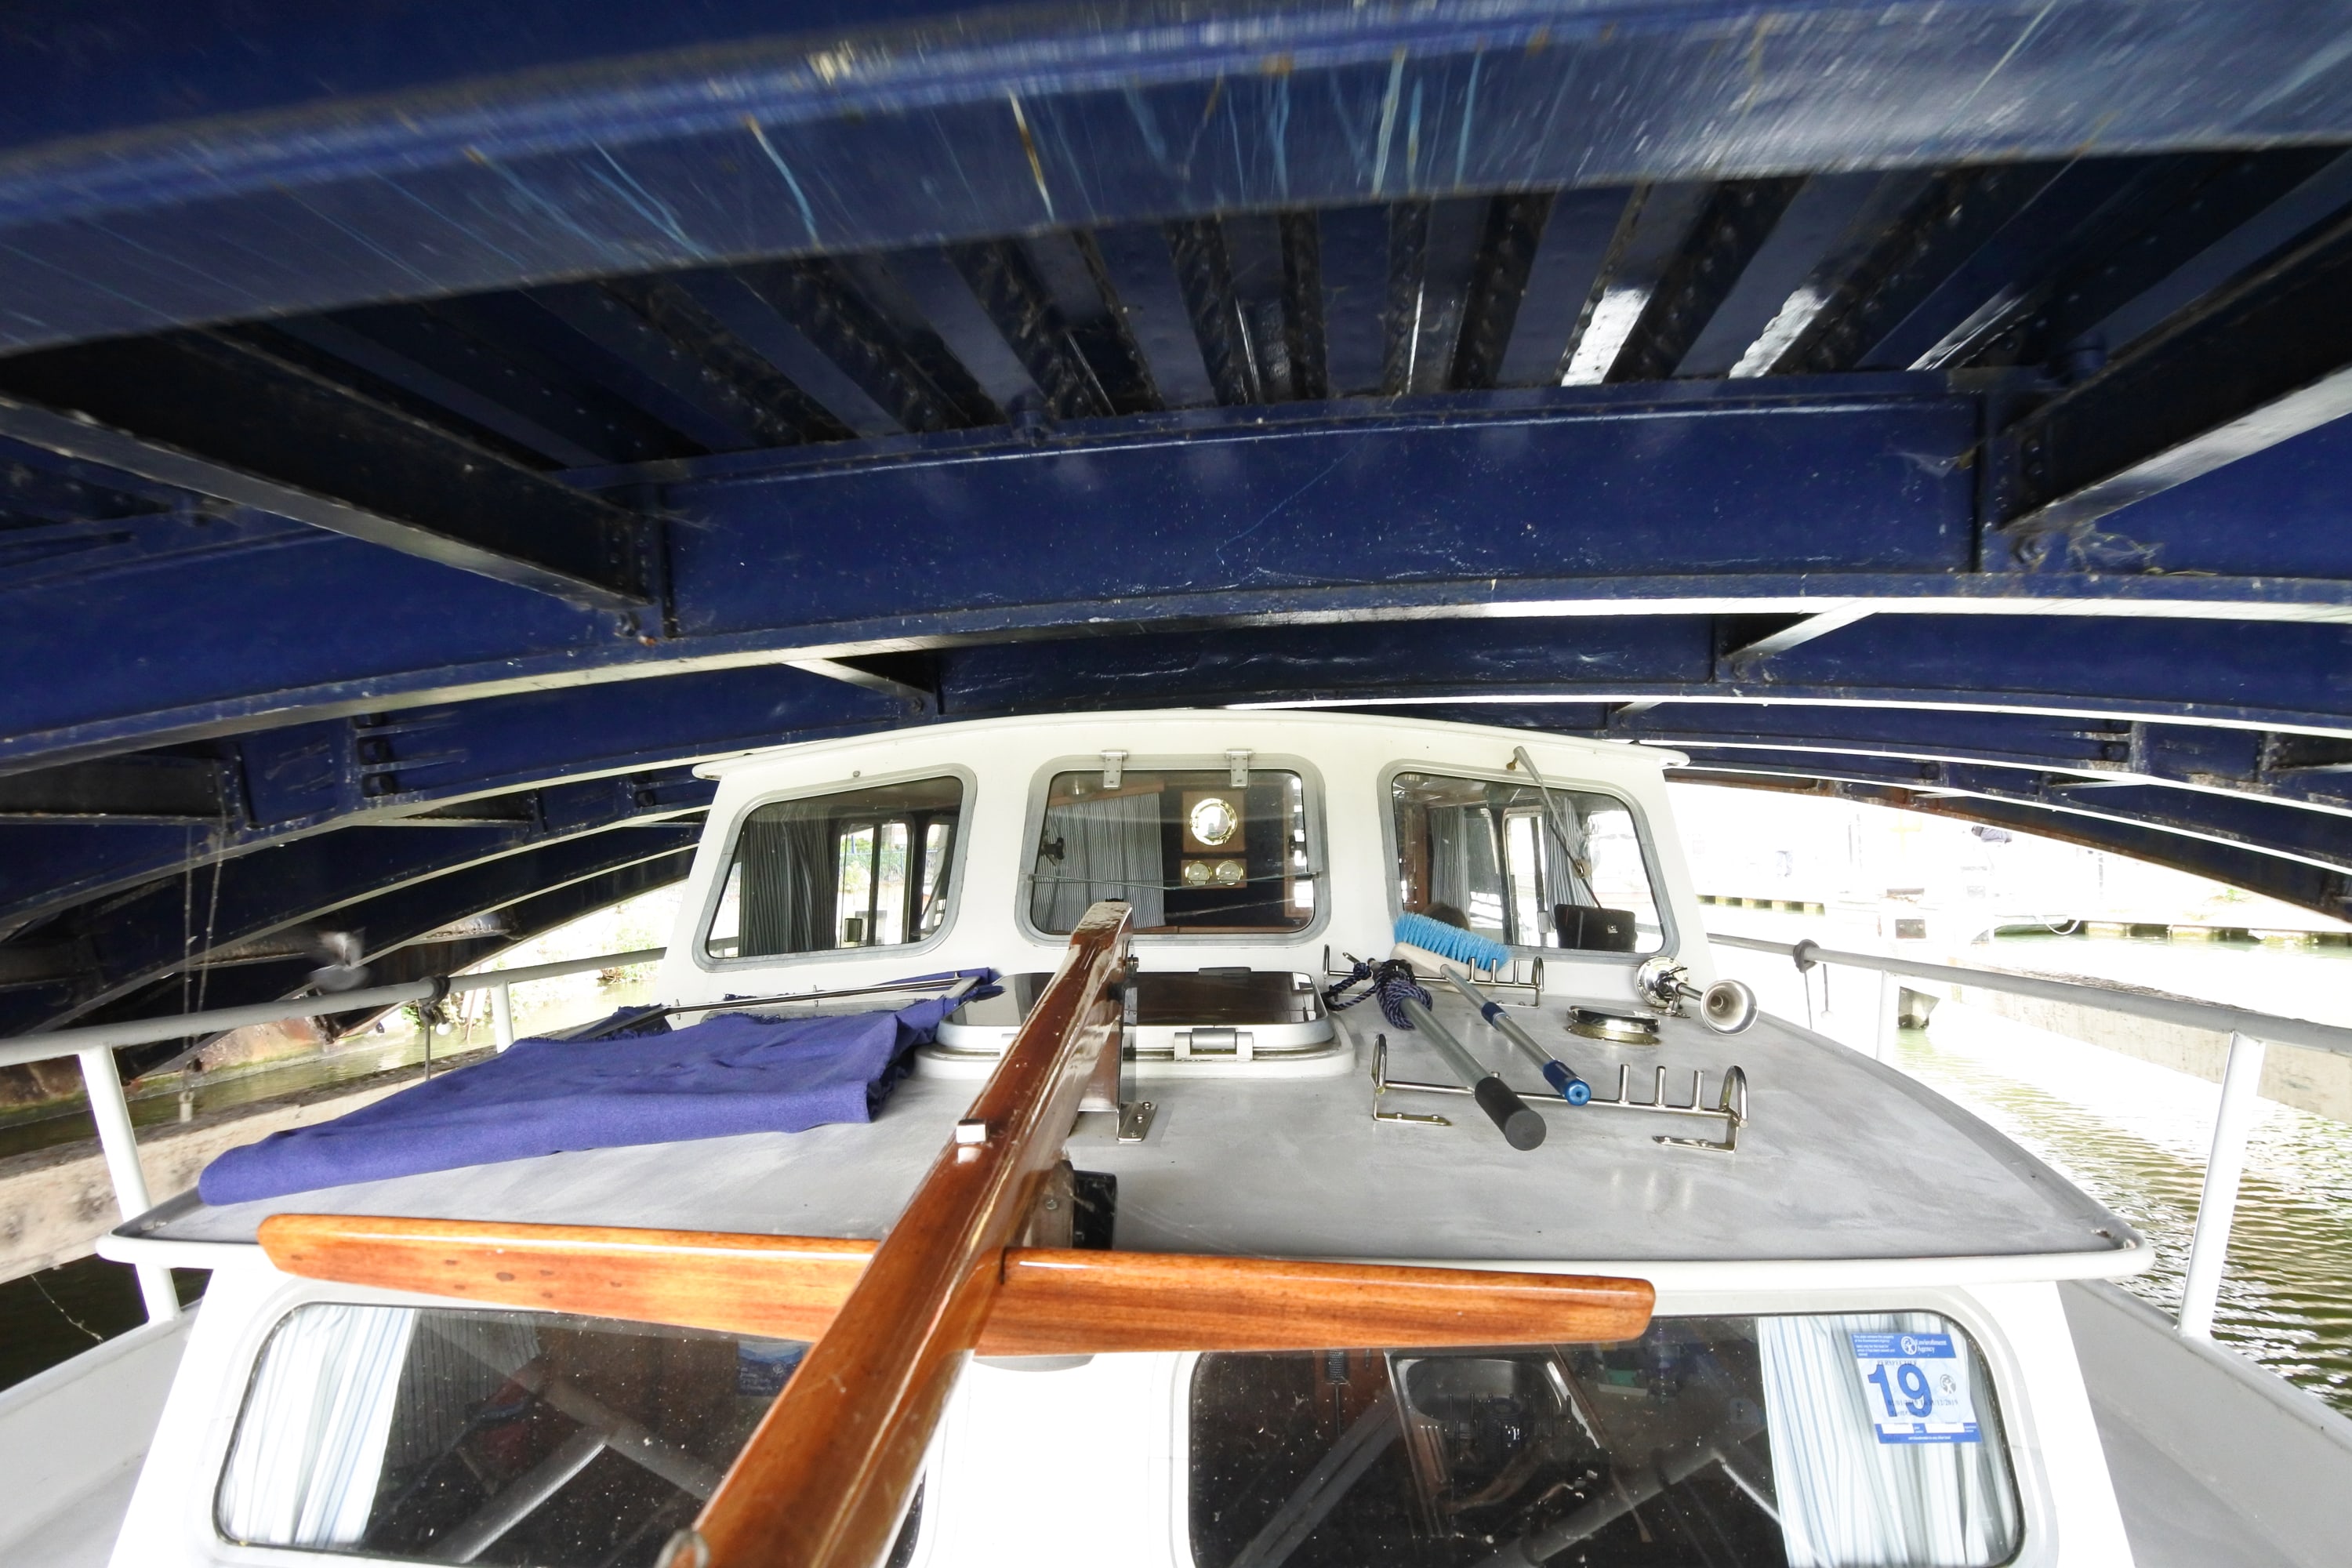 Very tight fit photographed by our crew looking aft. Photo by Zoë Jennings